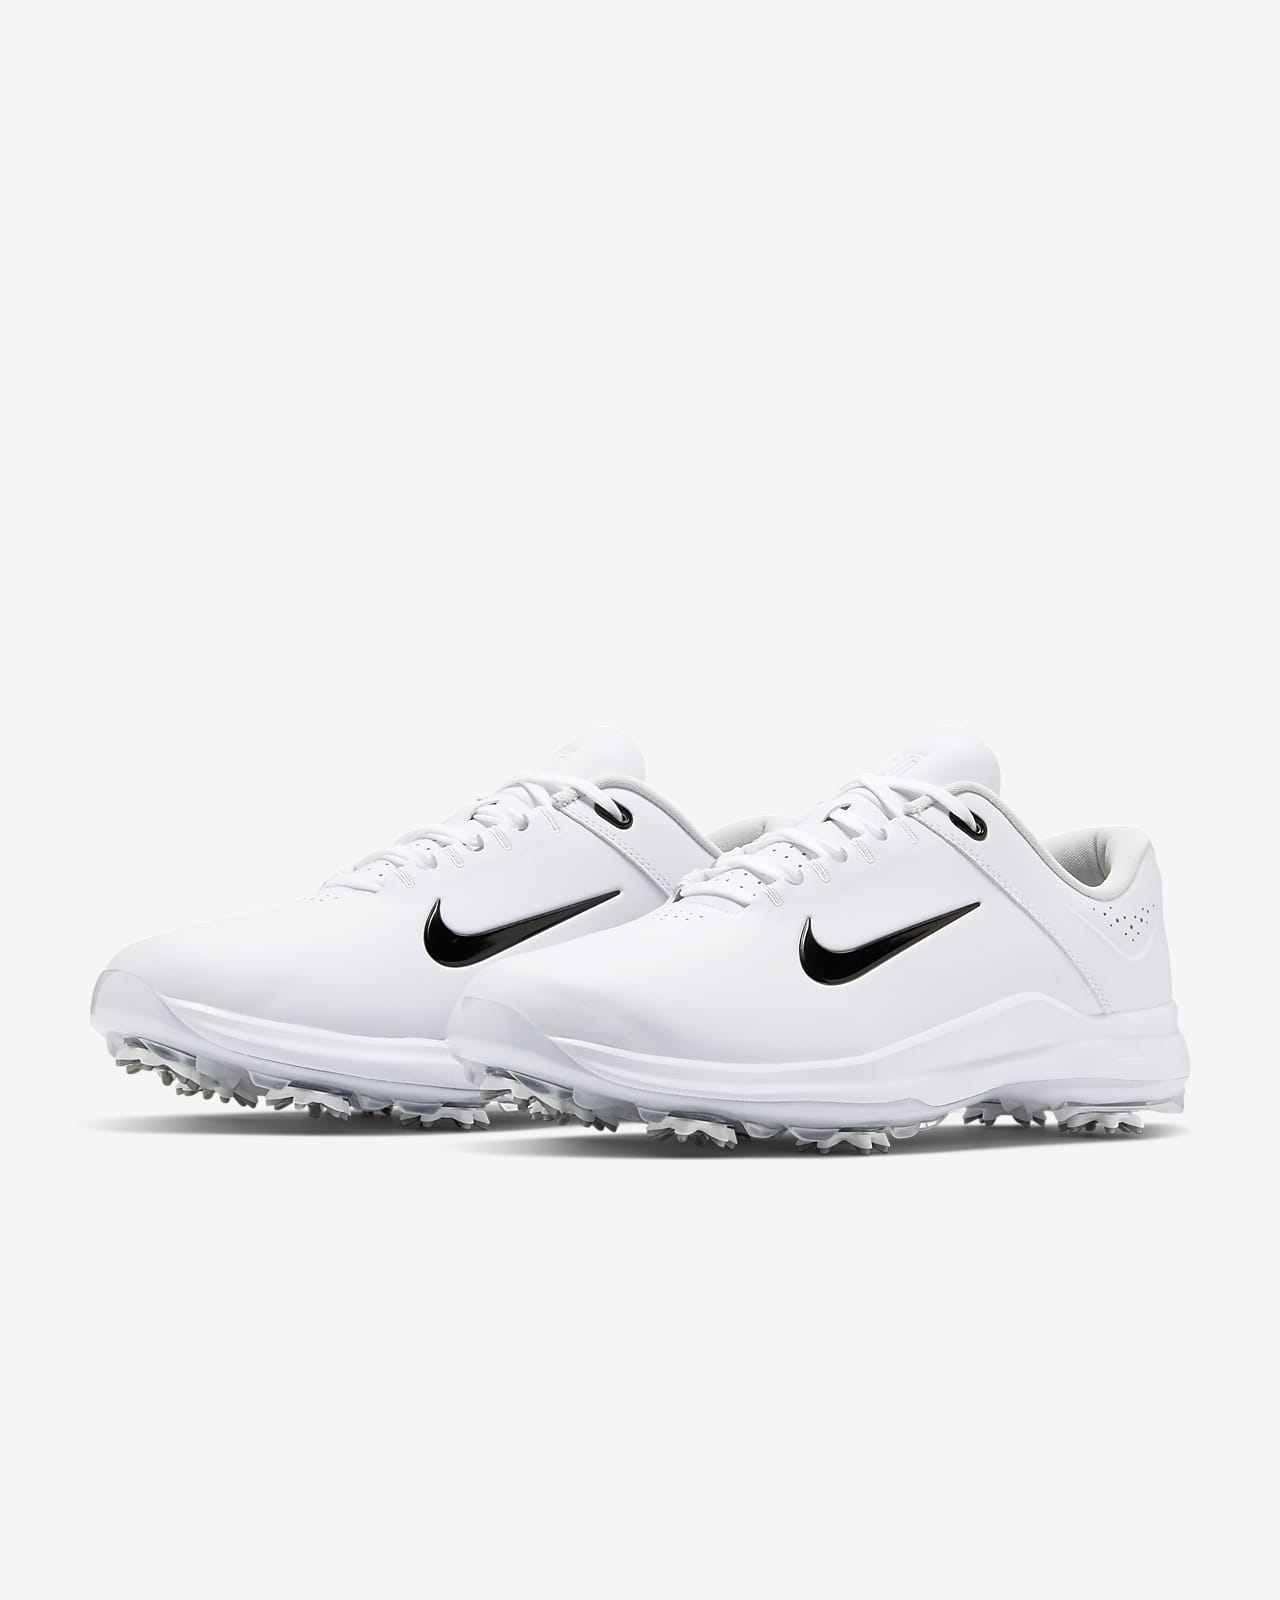 tiger woods shoes nike